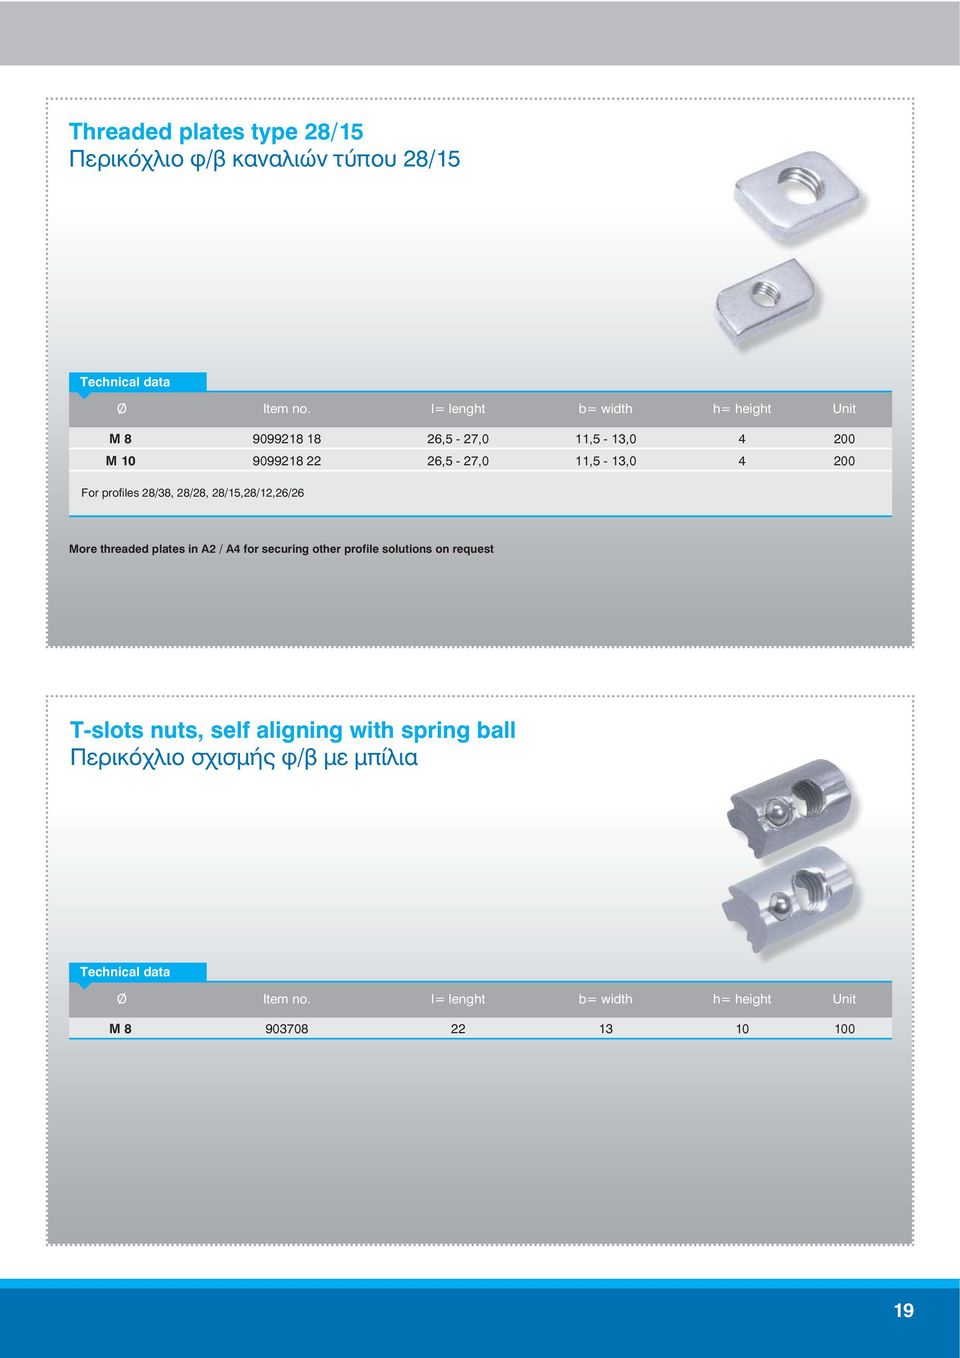 threaded plates in A2 / A for securing other profile solutions on request T-slots nuts, self